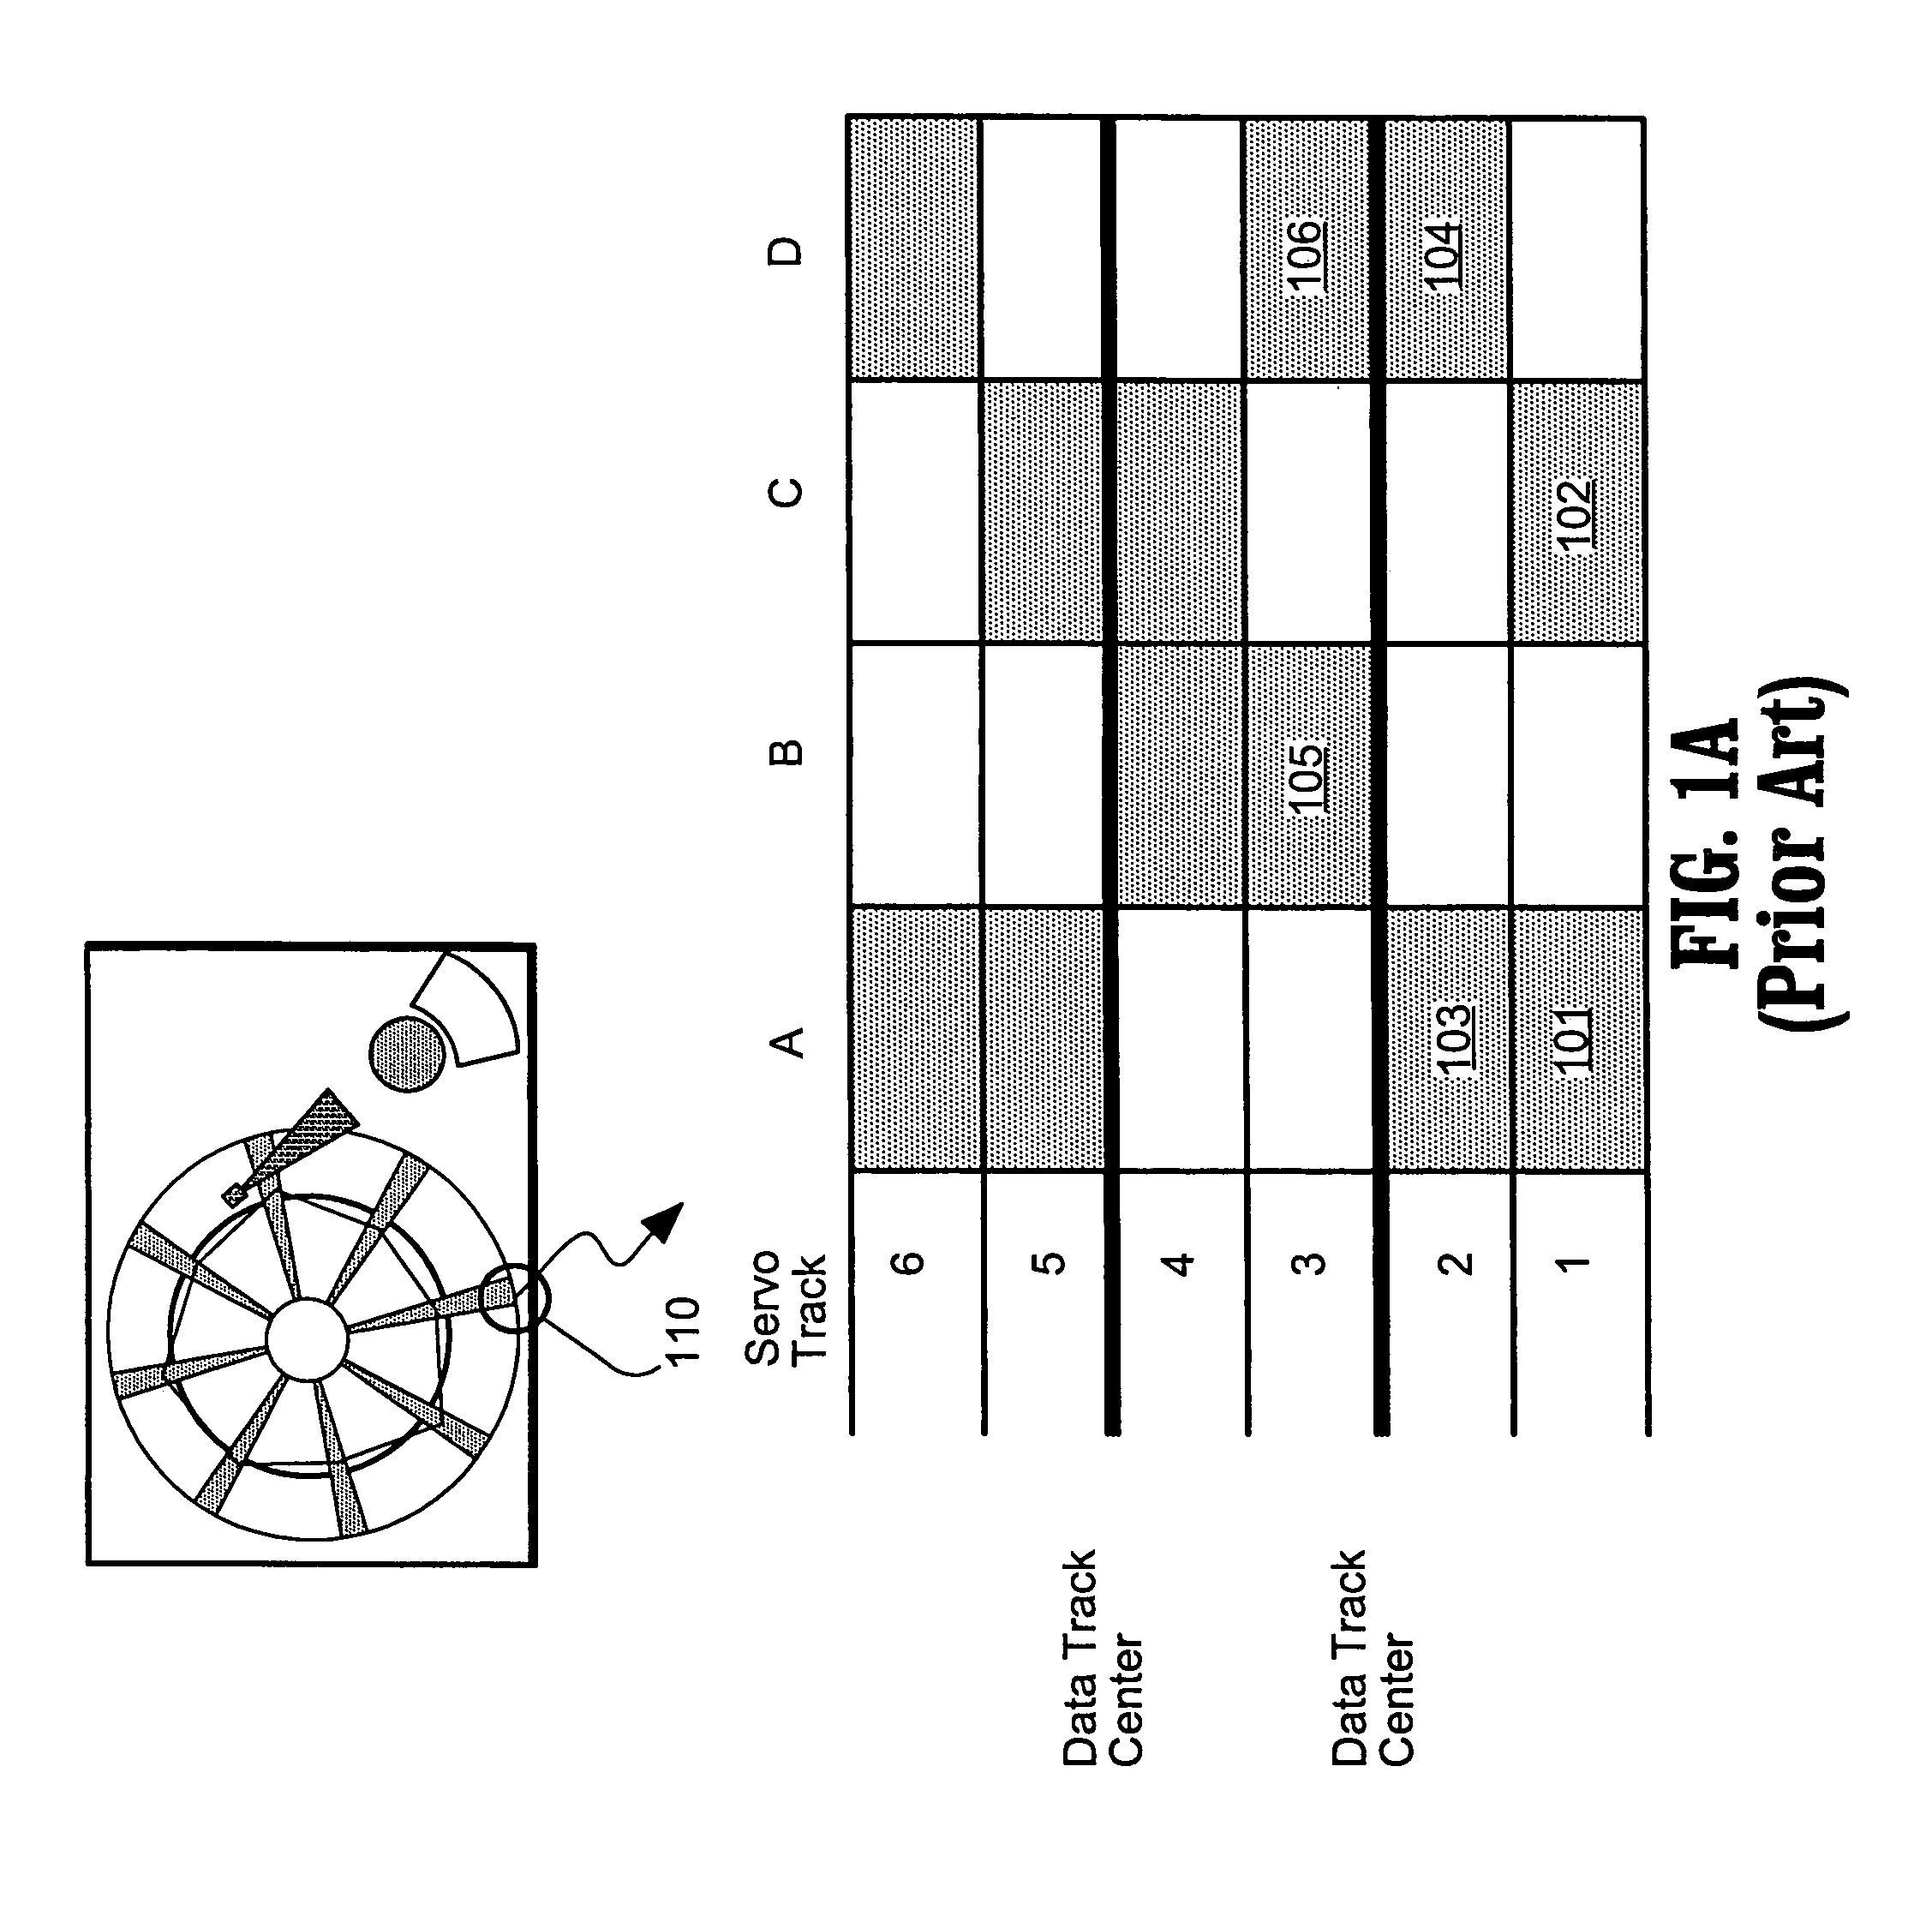 Radial self-propagation pattern generation for disk file servowriting